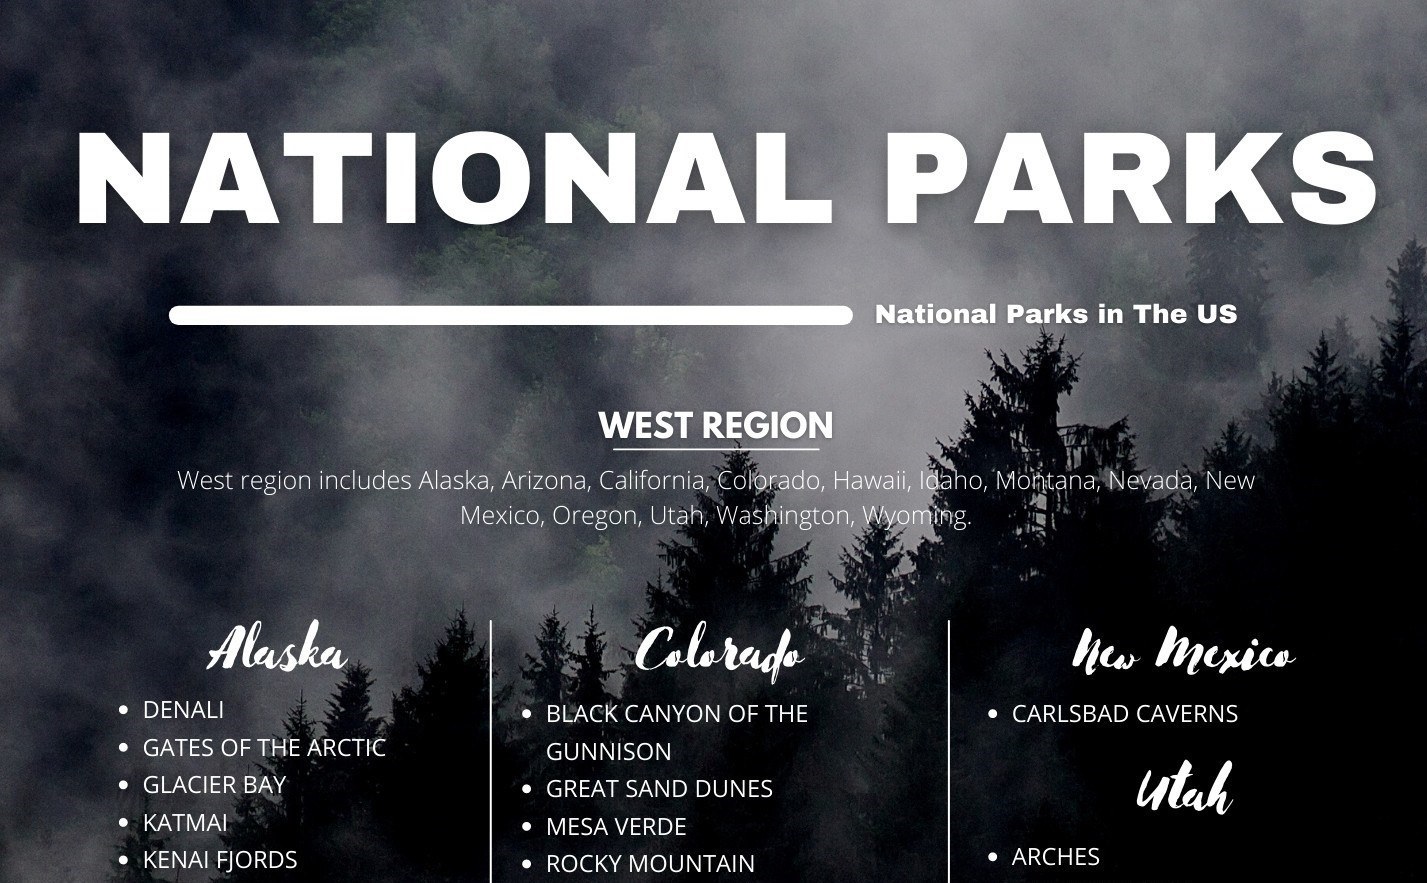 US National Parks featured